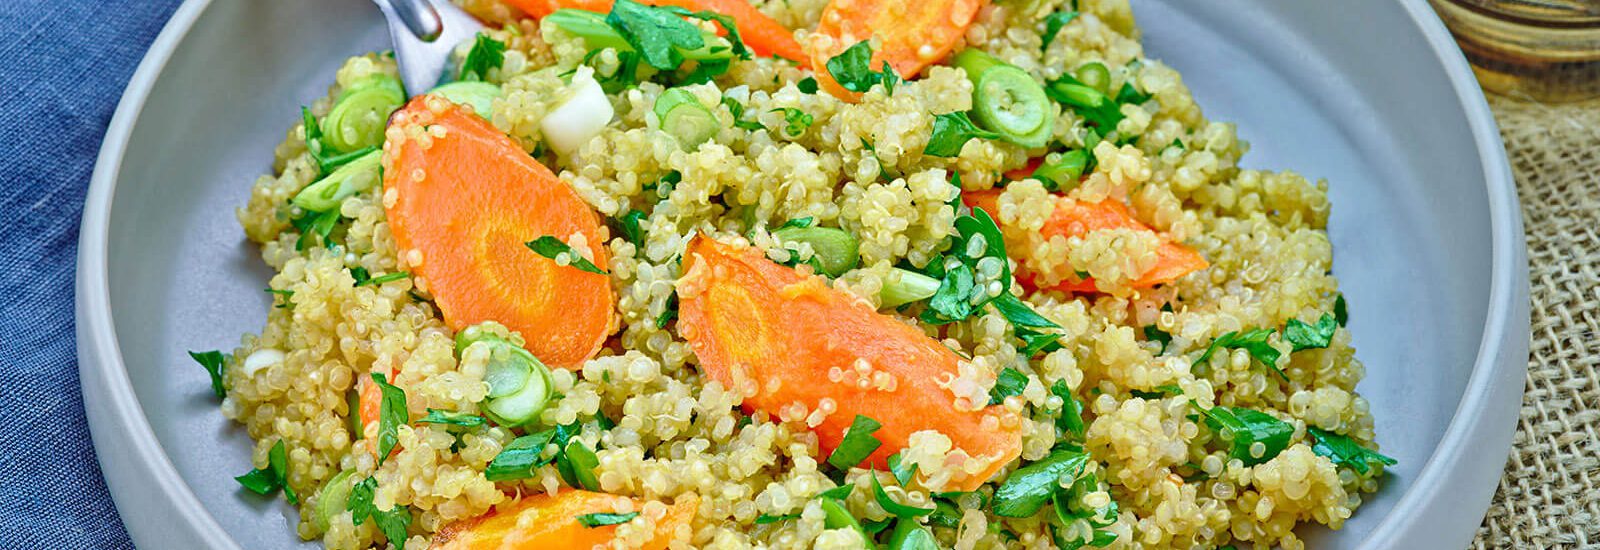 Quinoa and roasted carrot salad